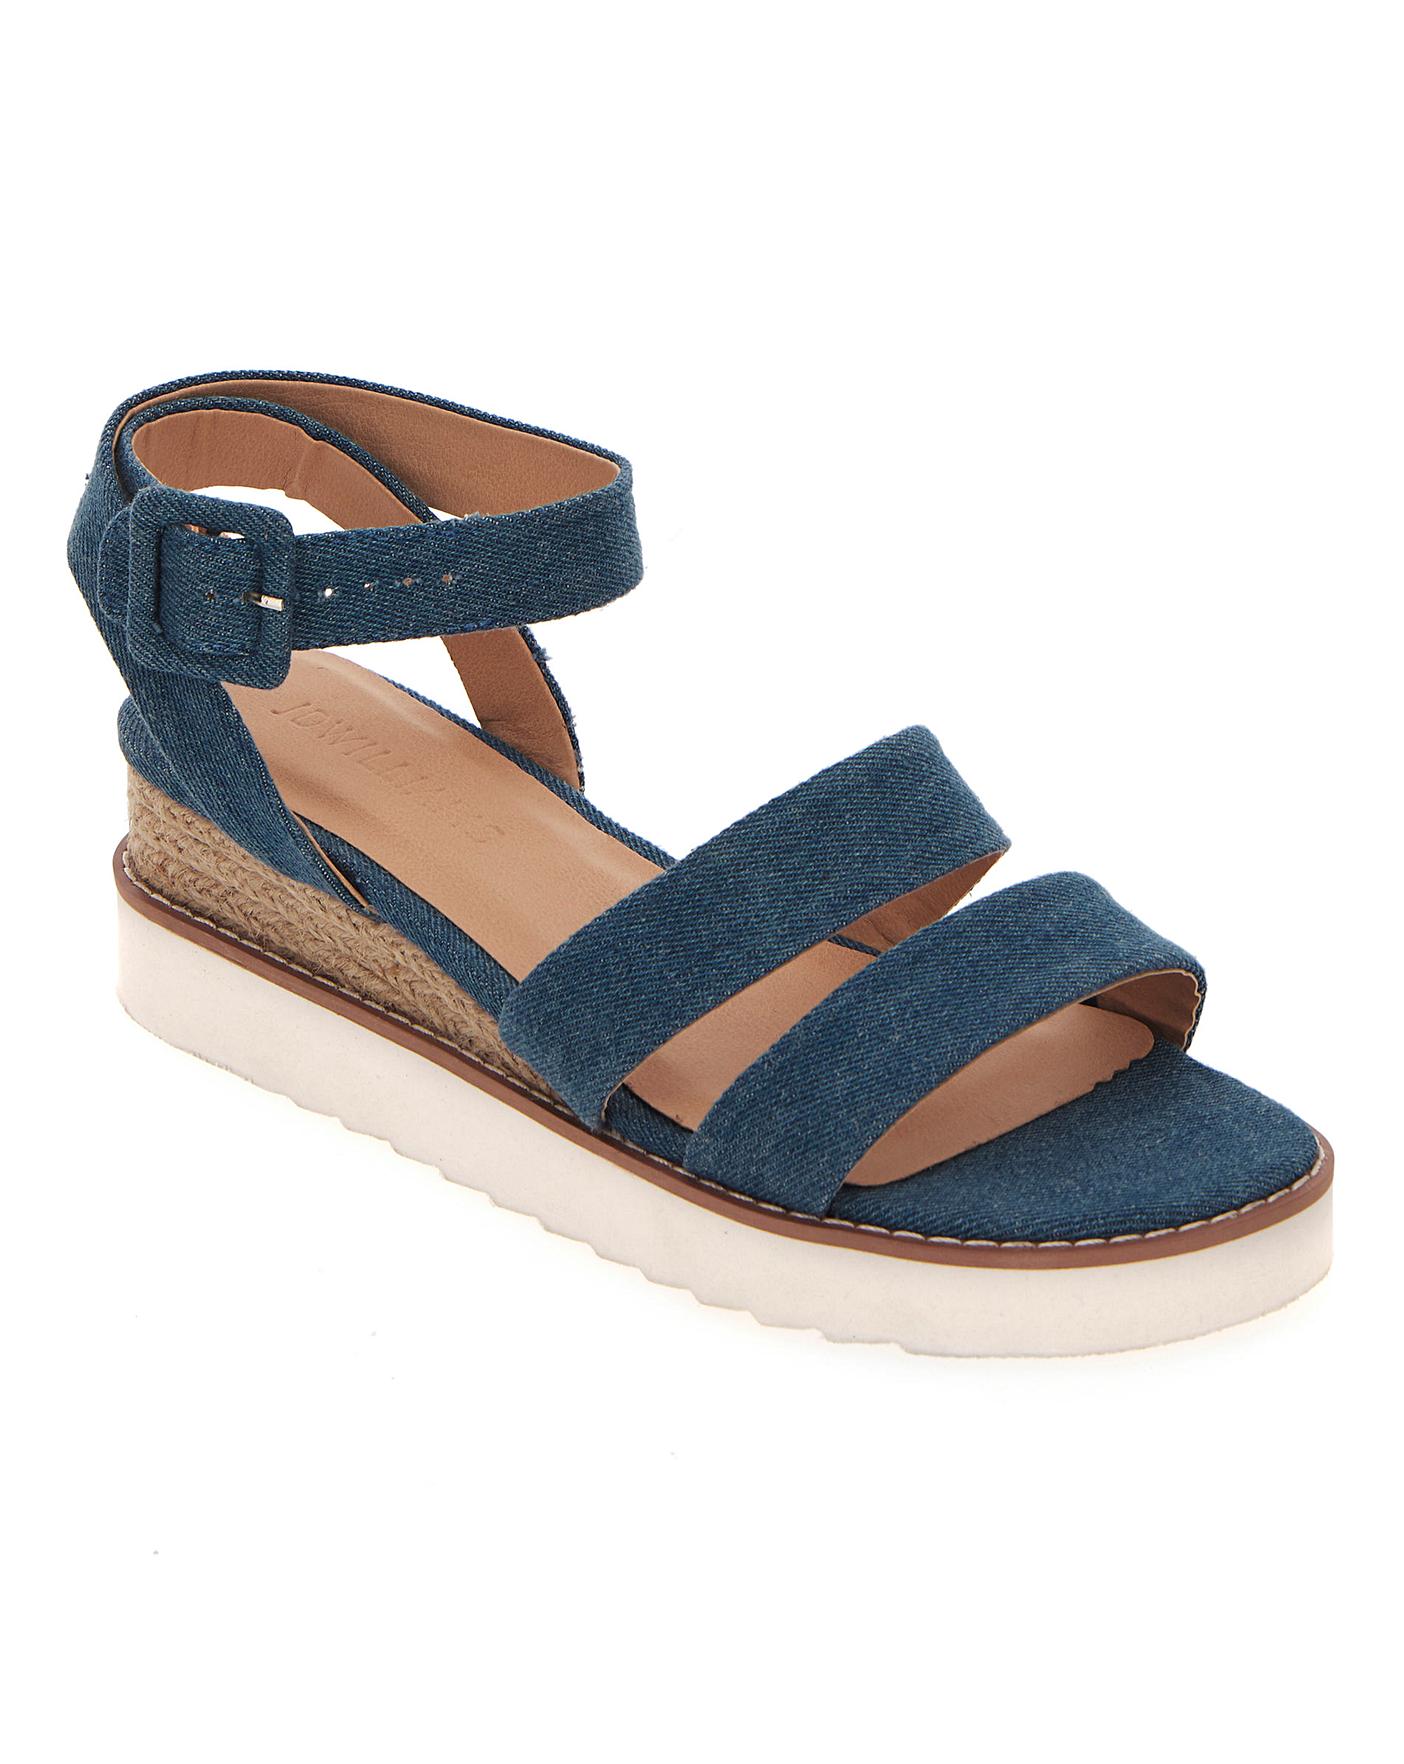 Twin Strap Wedge Sandals E Fit | J D Williams